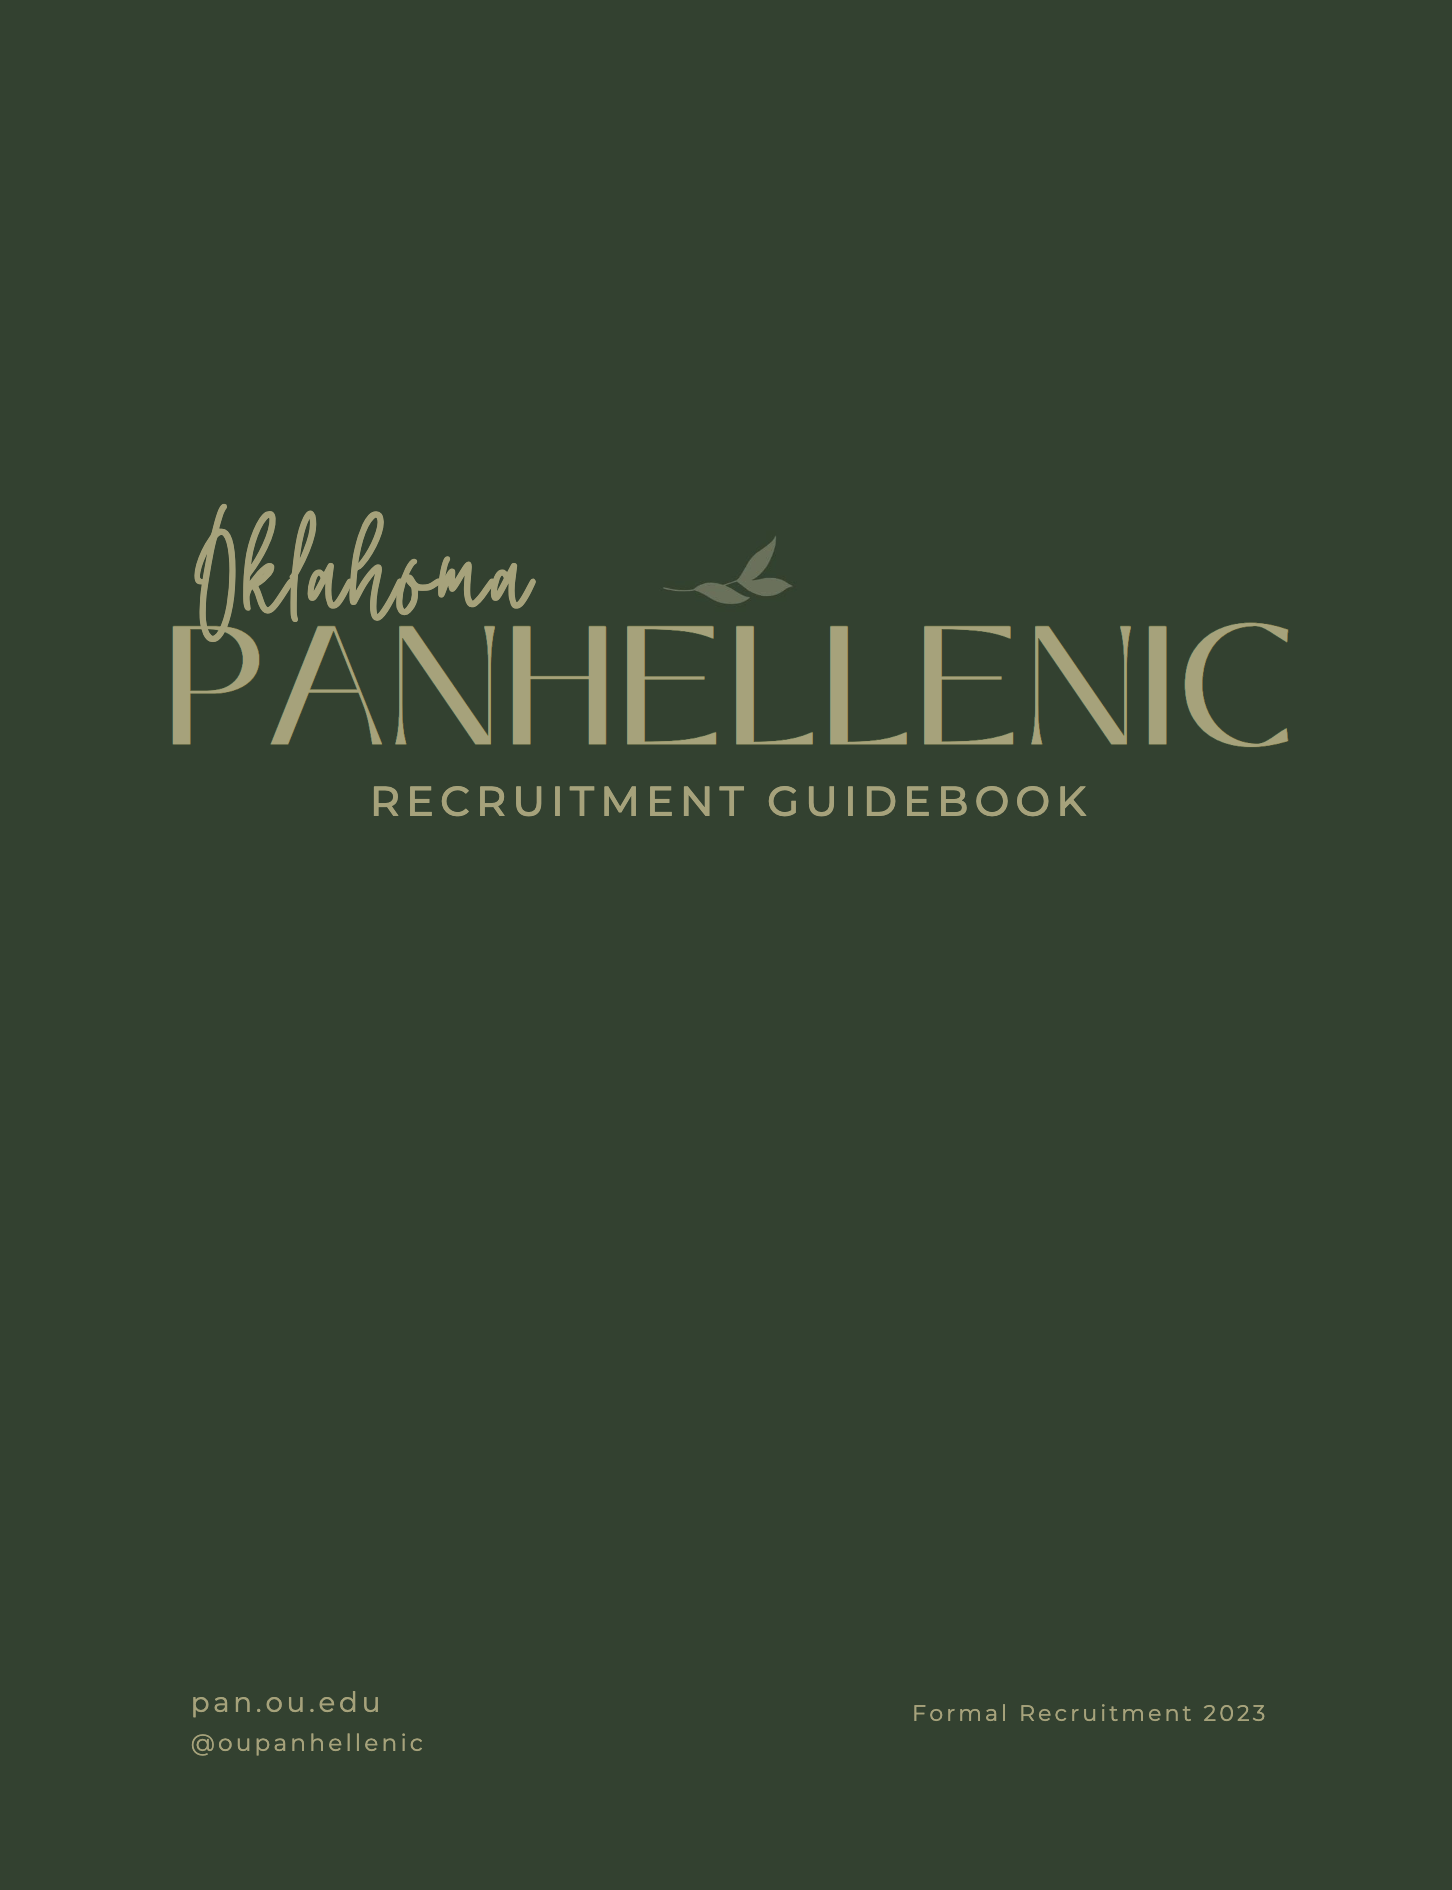 Front cover of Panhellenic Guidebook publication. Oklahoma Panhellenic Recruitment Guidebook, pan.ou.edu, @oupanhellenic. Formal Recruitment 2023.